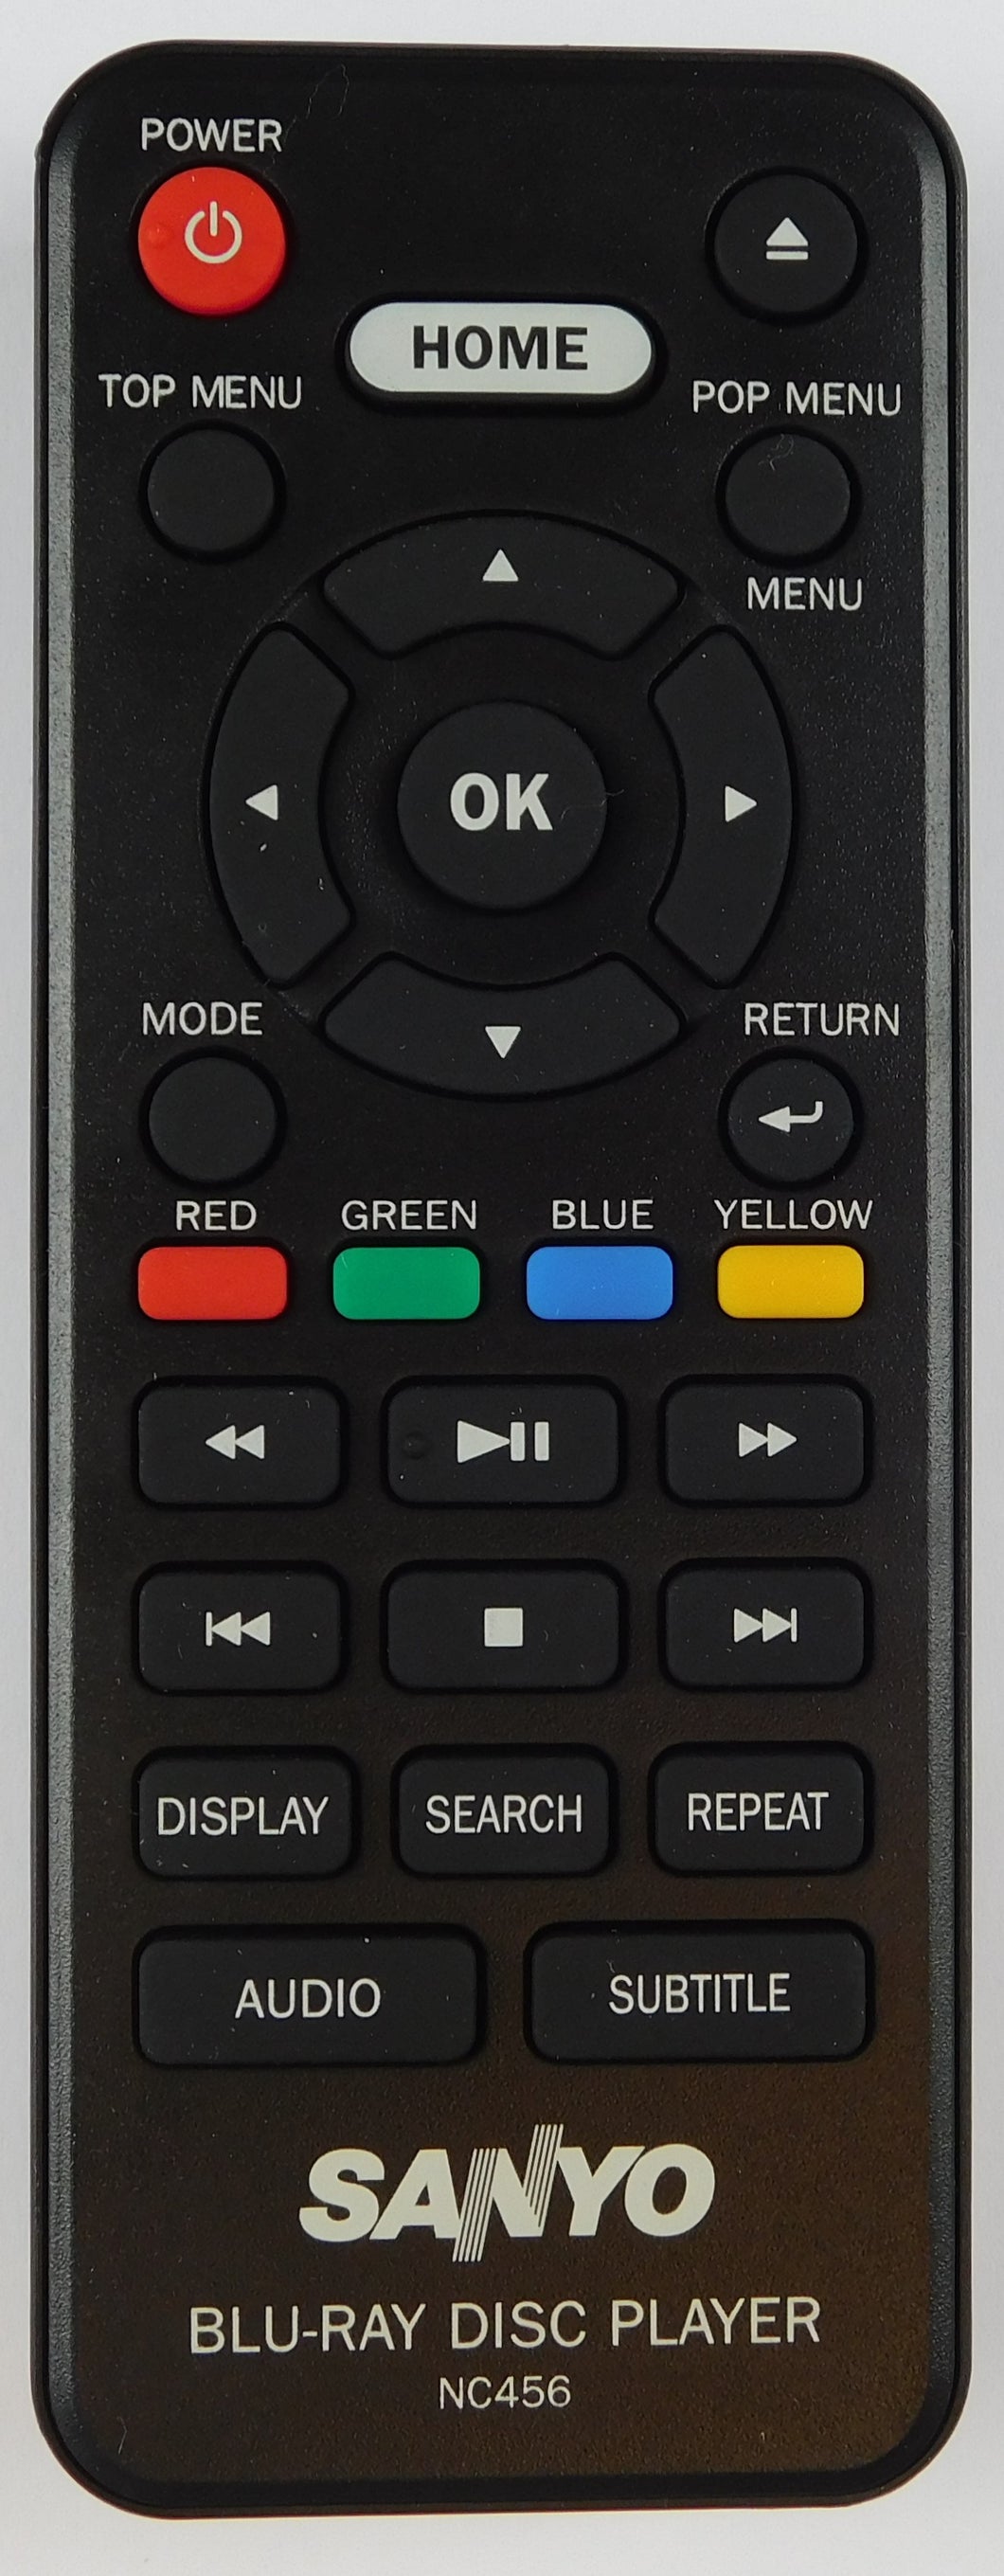 OEM replacement remote control for Sanyo Blu-ray players NC456UL